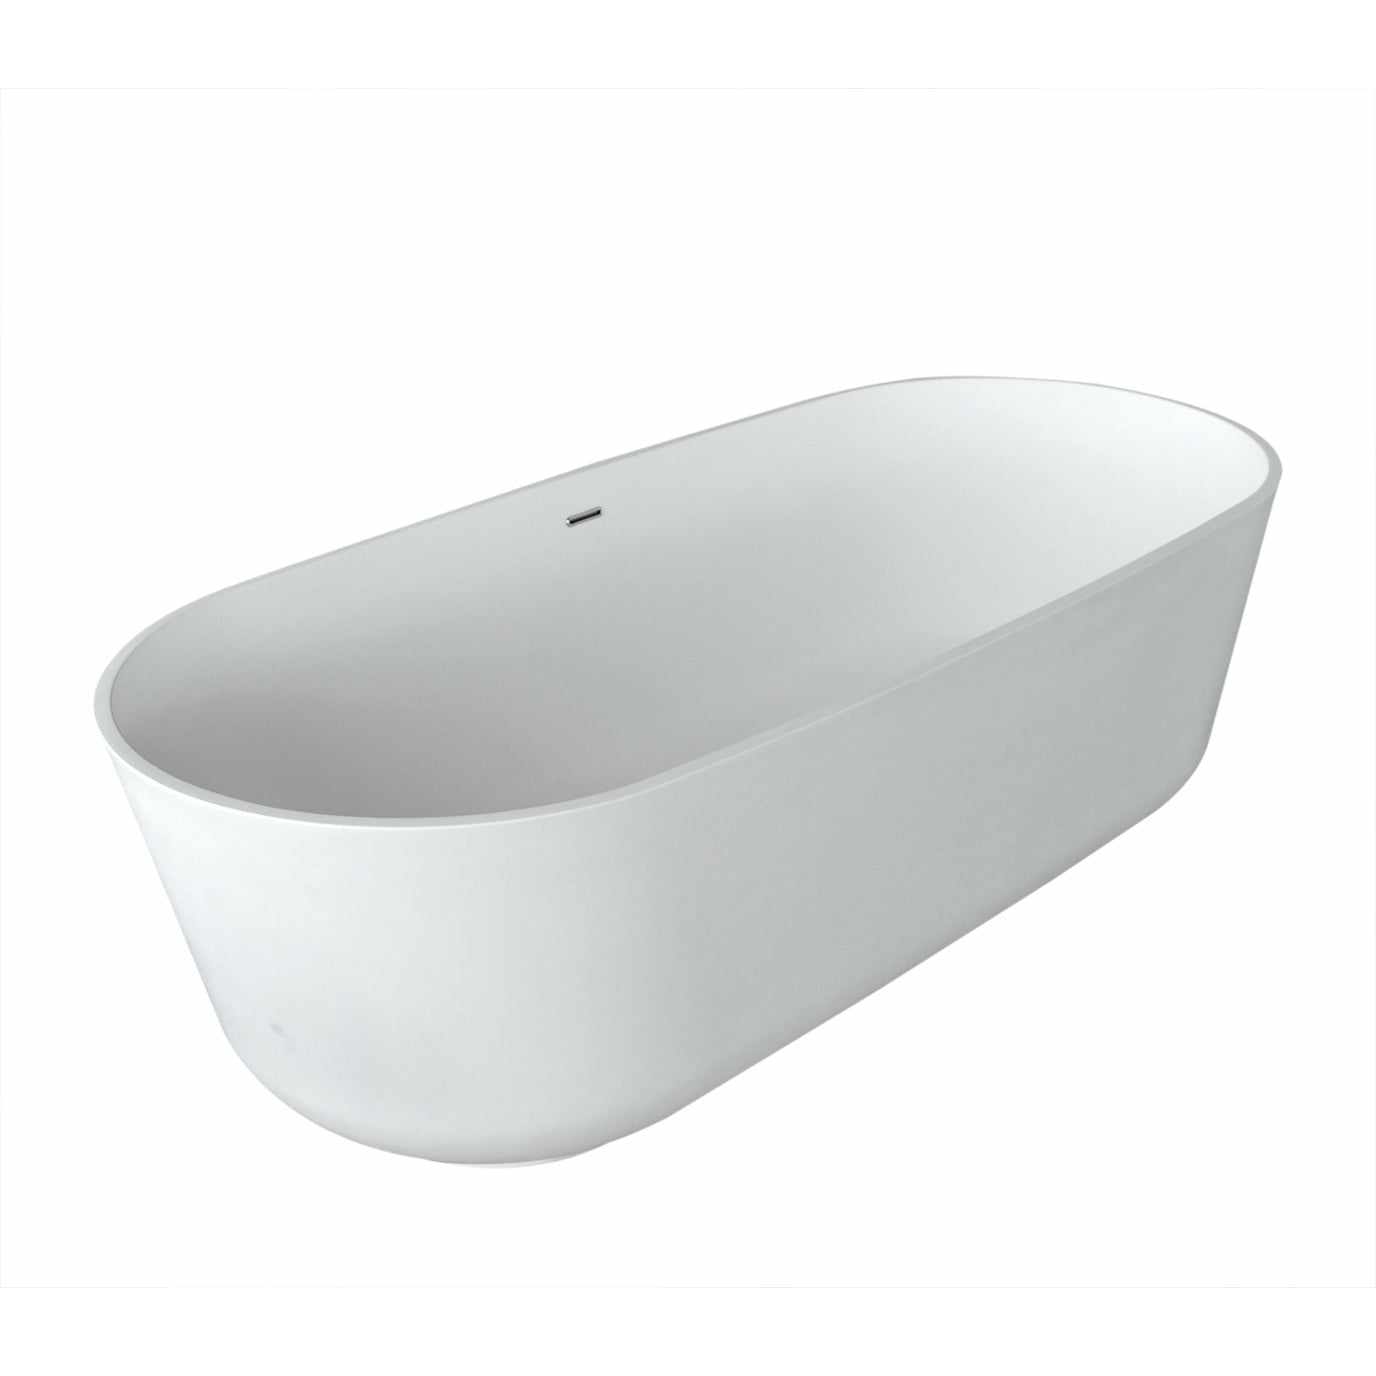 Anzzi Sabbia 5.9 ft. Solid Surface Classic Freestanding Soaking Bathtub in Matte White and Kros Faucet in Chrome FT511-0025 - Vital Hydrotherapy